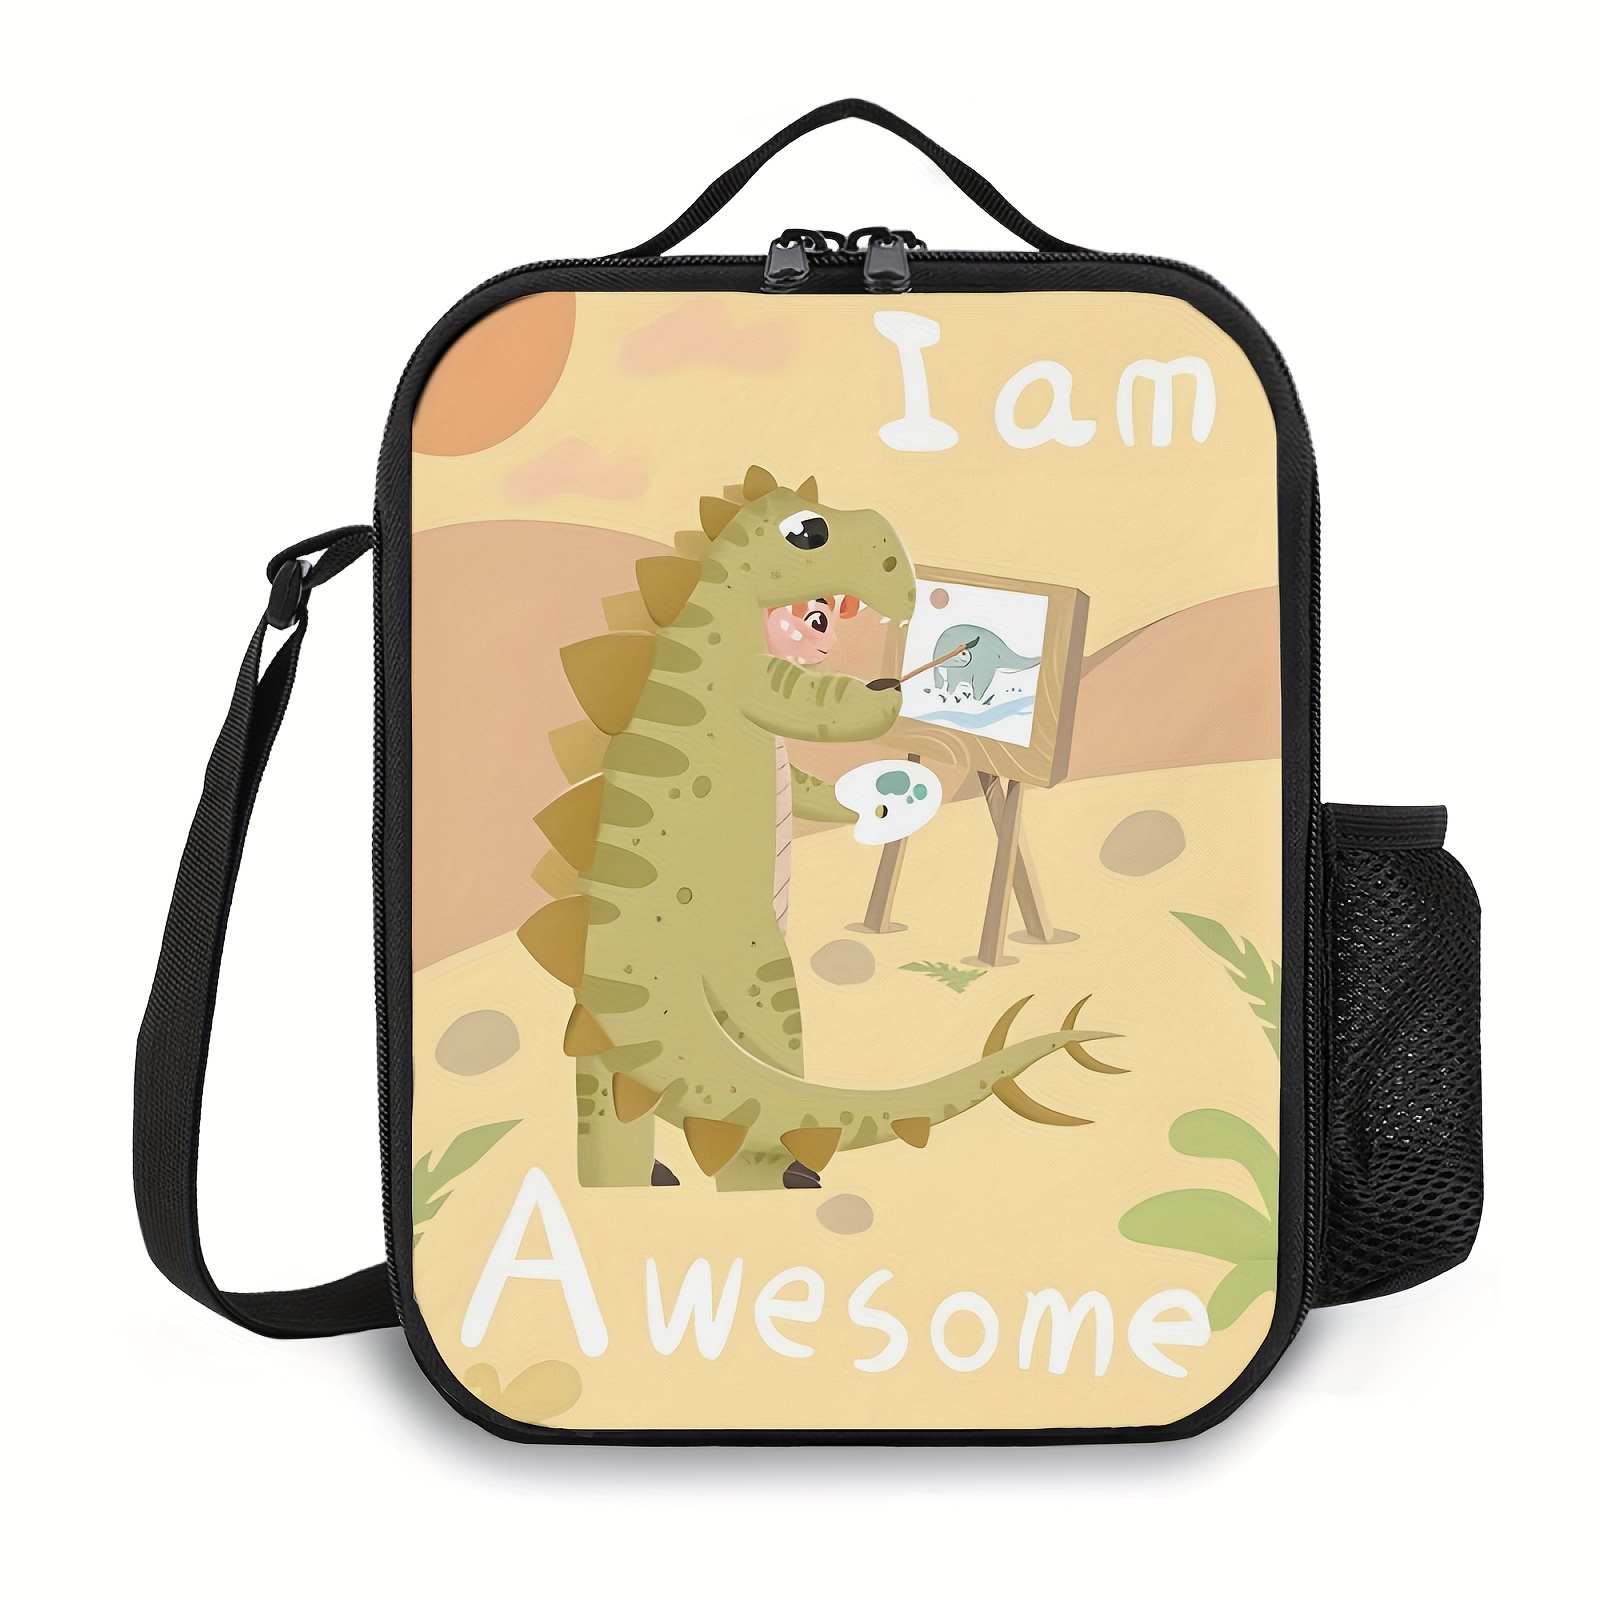 Is That The New 1pc Cartoon Dinosaur Pattern Lunch Bag ??